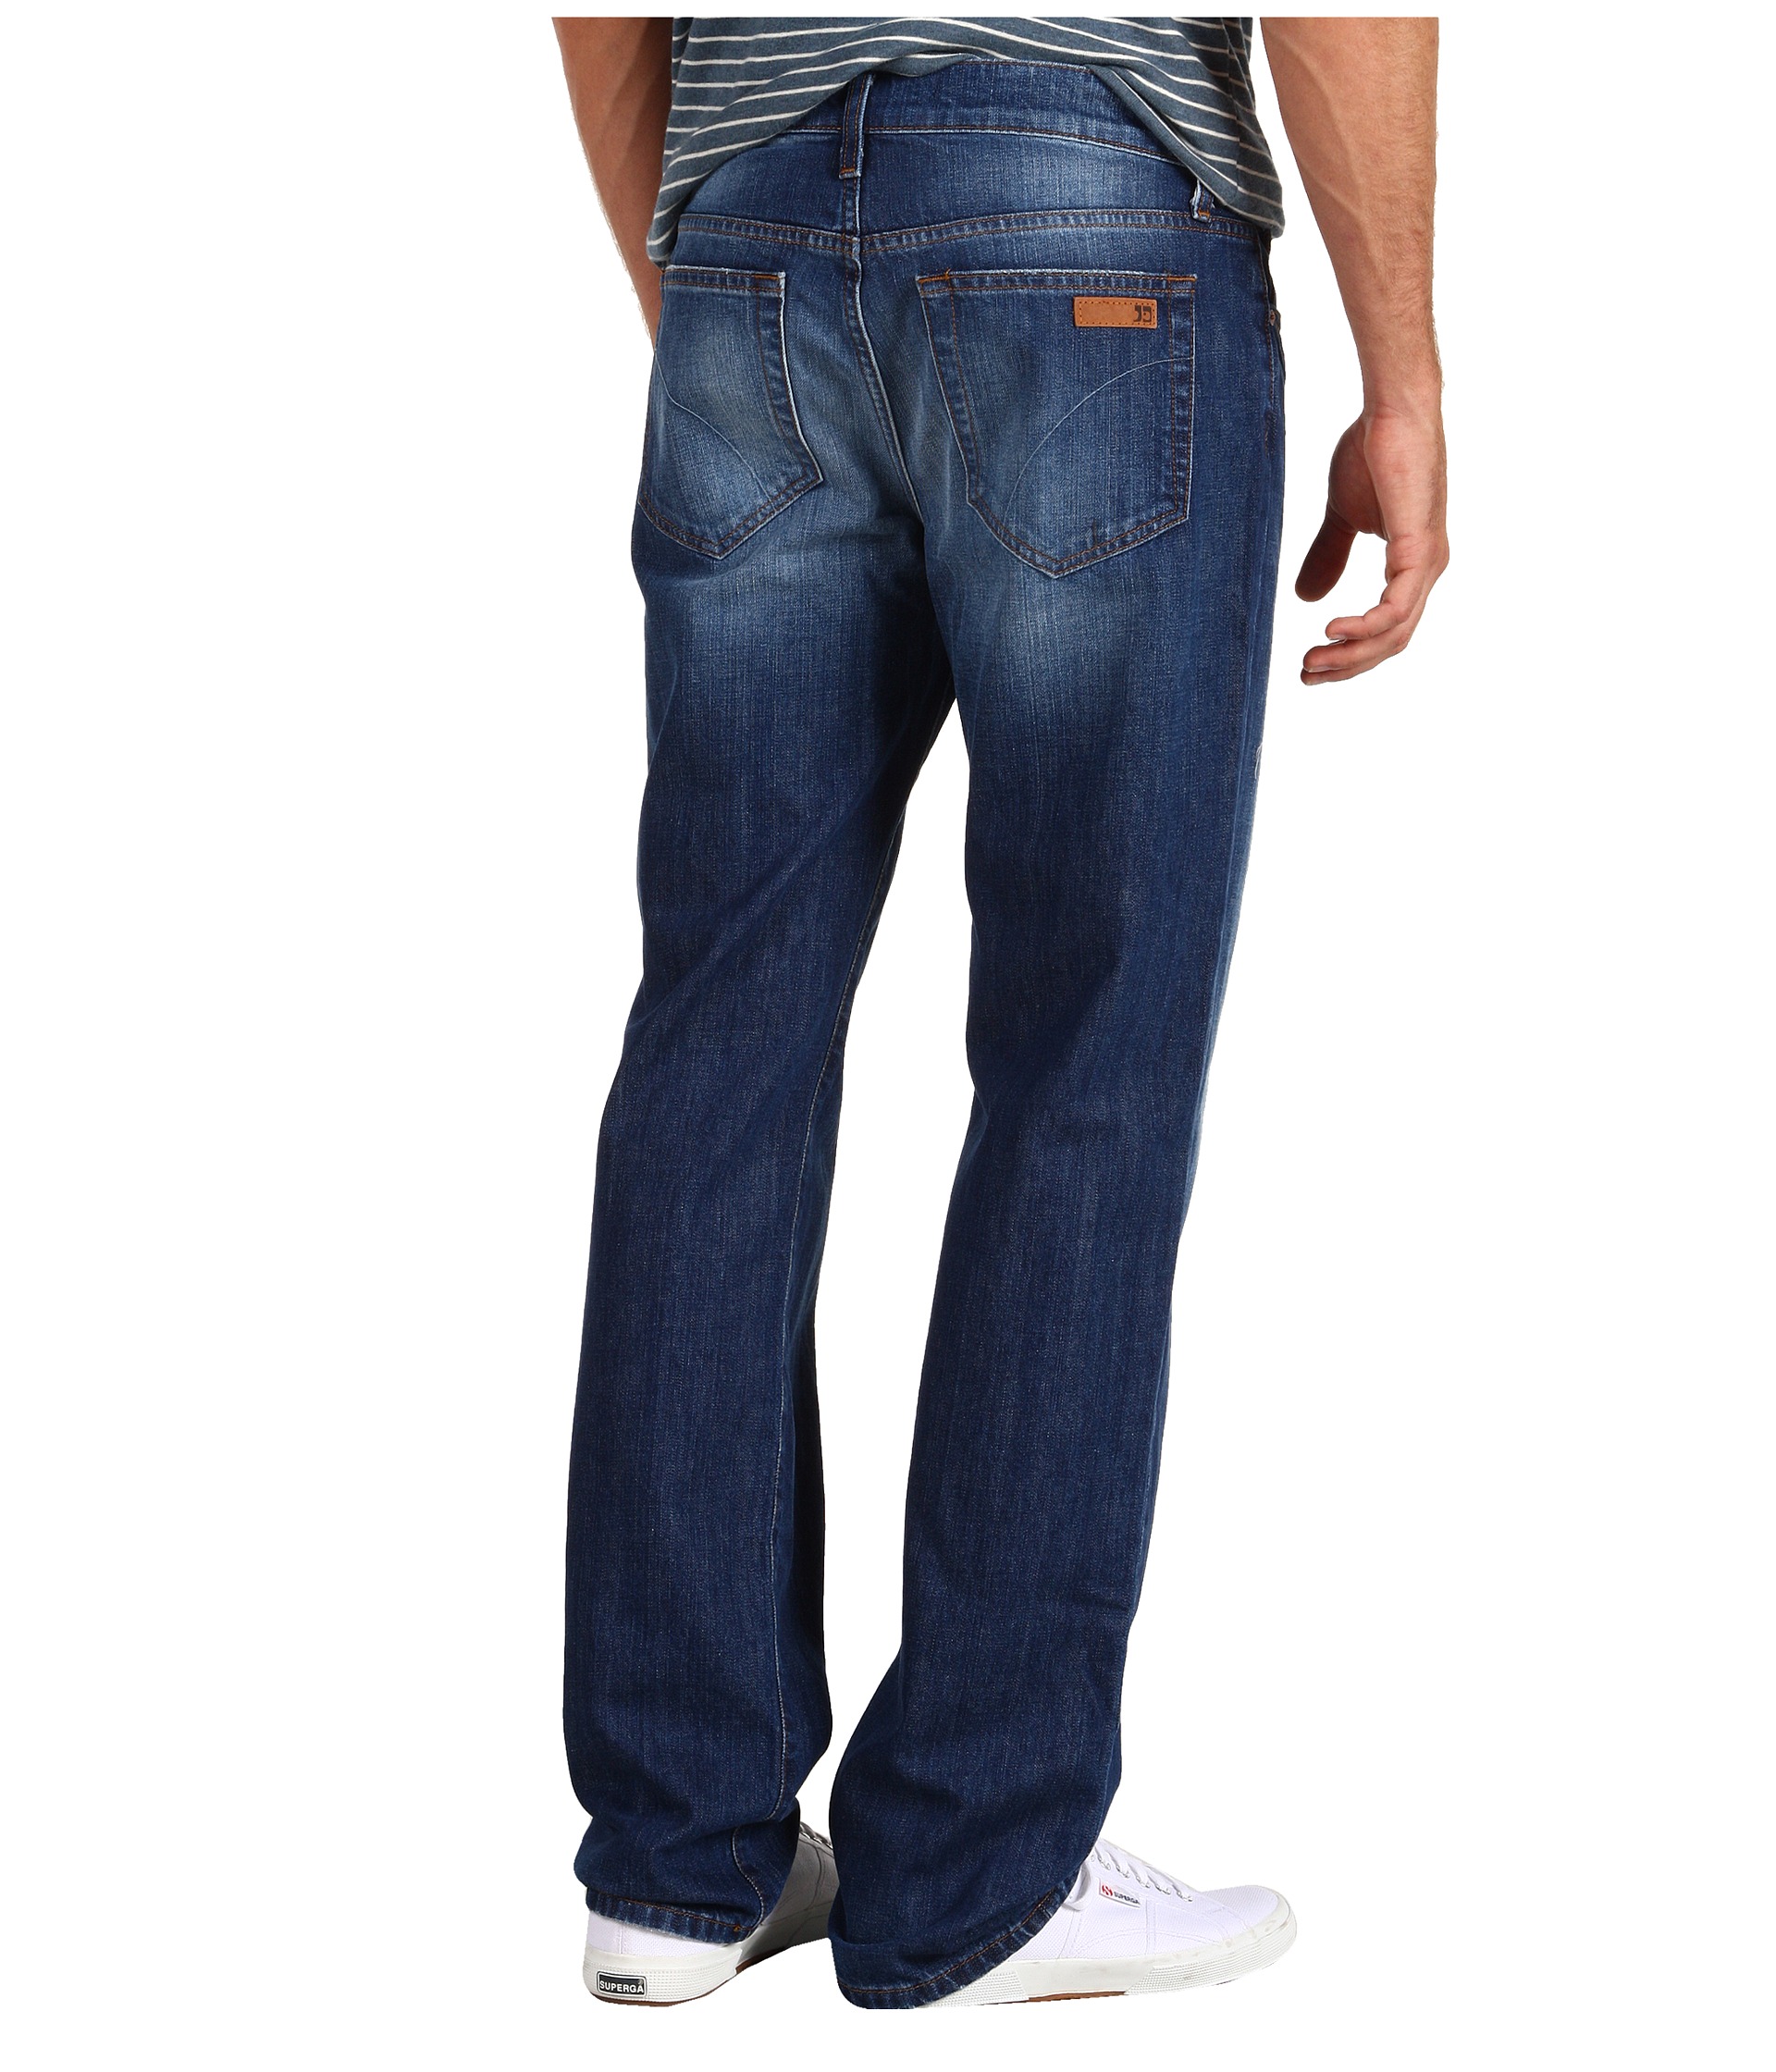 Joes Jeans Classic Fit in Mikey $103.20 (  MSRP $172.00)